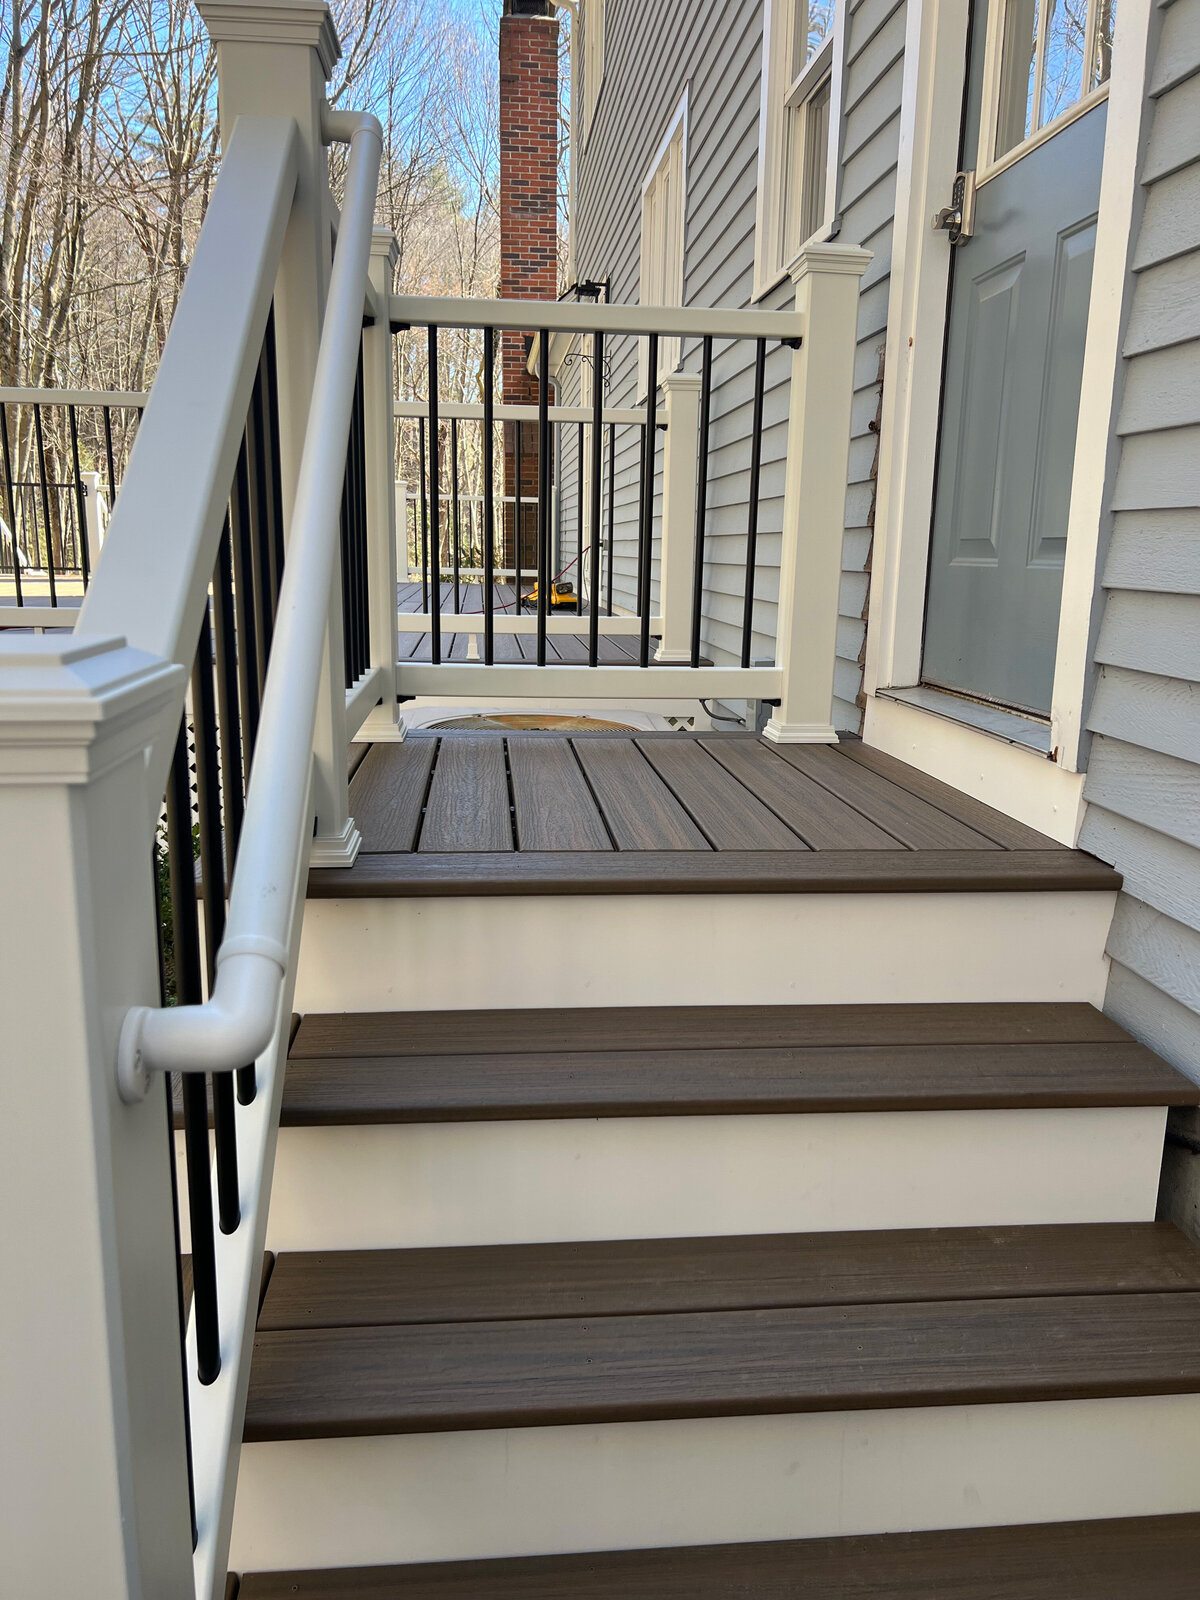 Small set of stairs for a side door with white railings